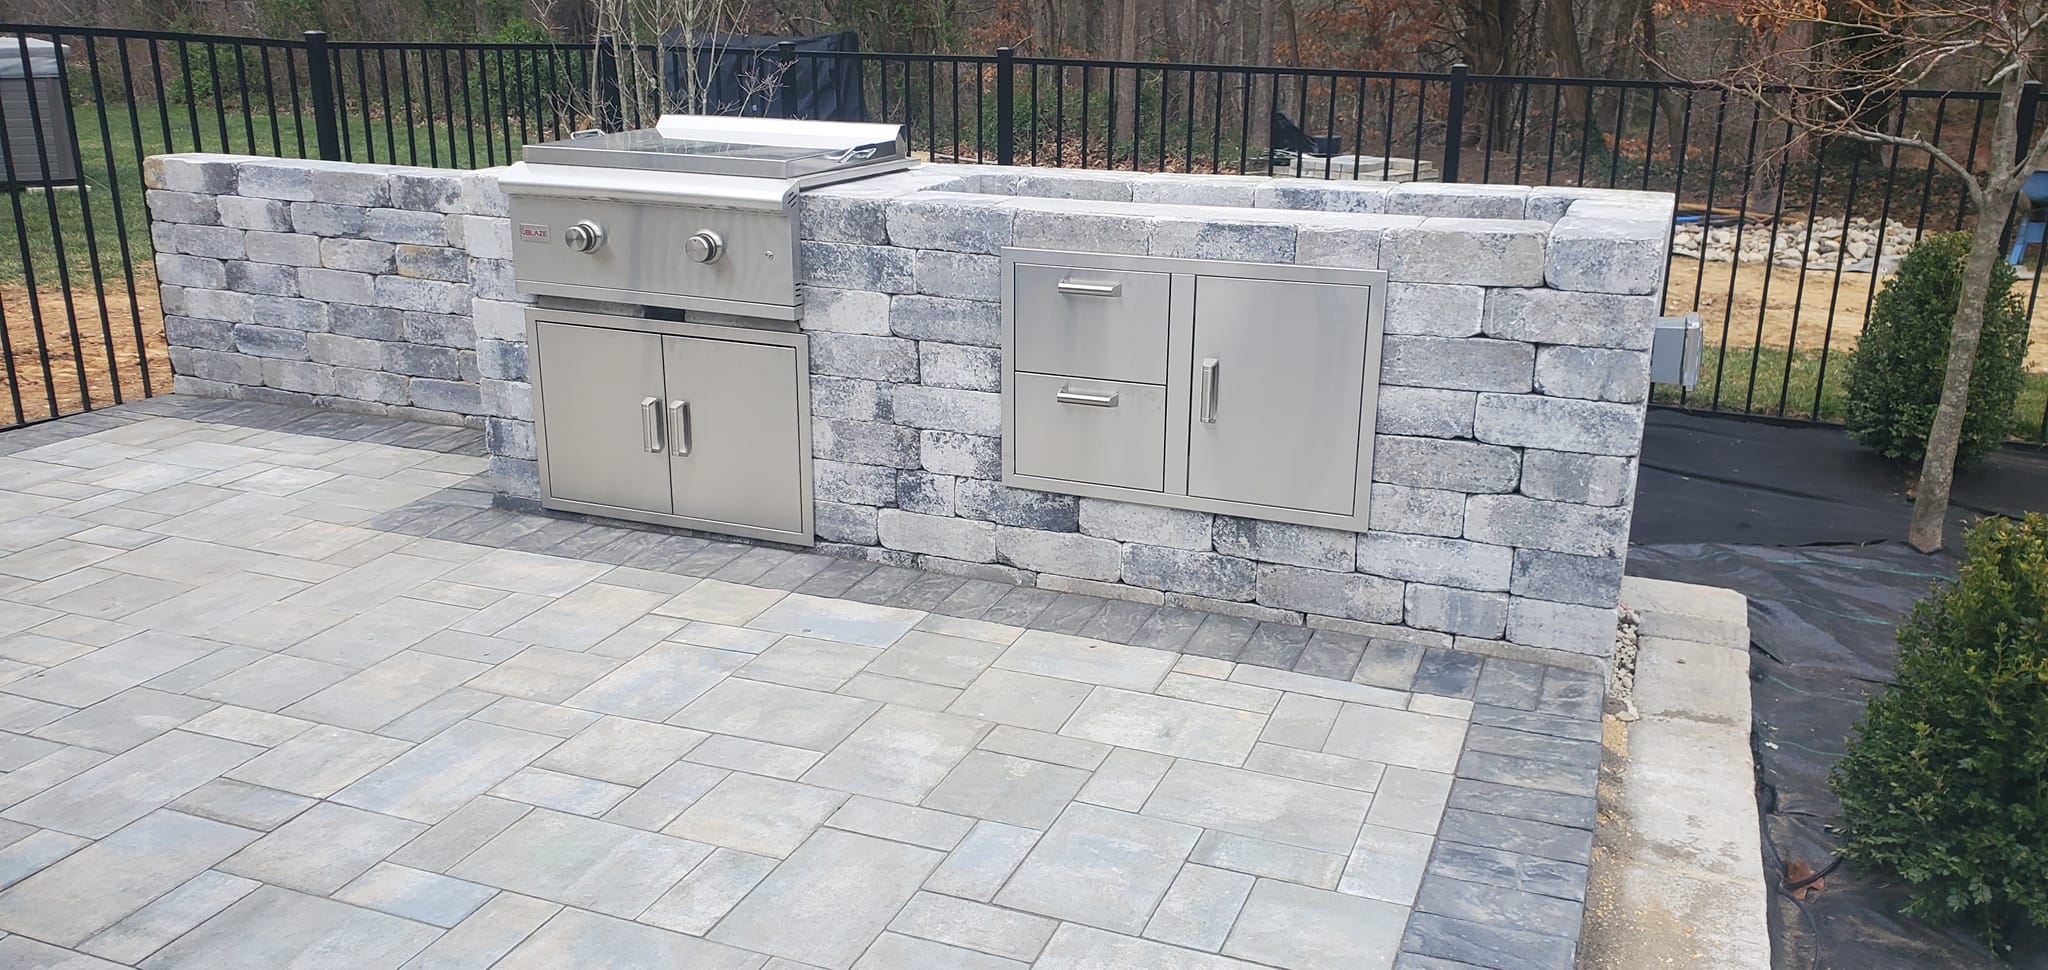 Adam's Lawn & Landscaping Charles County Maryland Paver Patio Kitchen